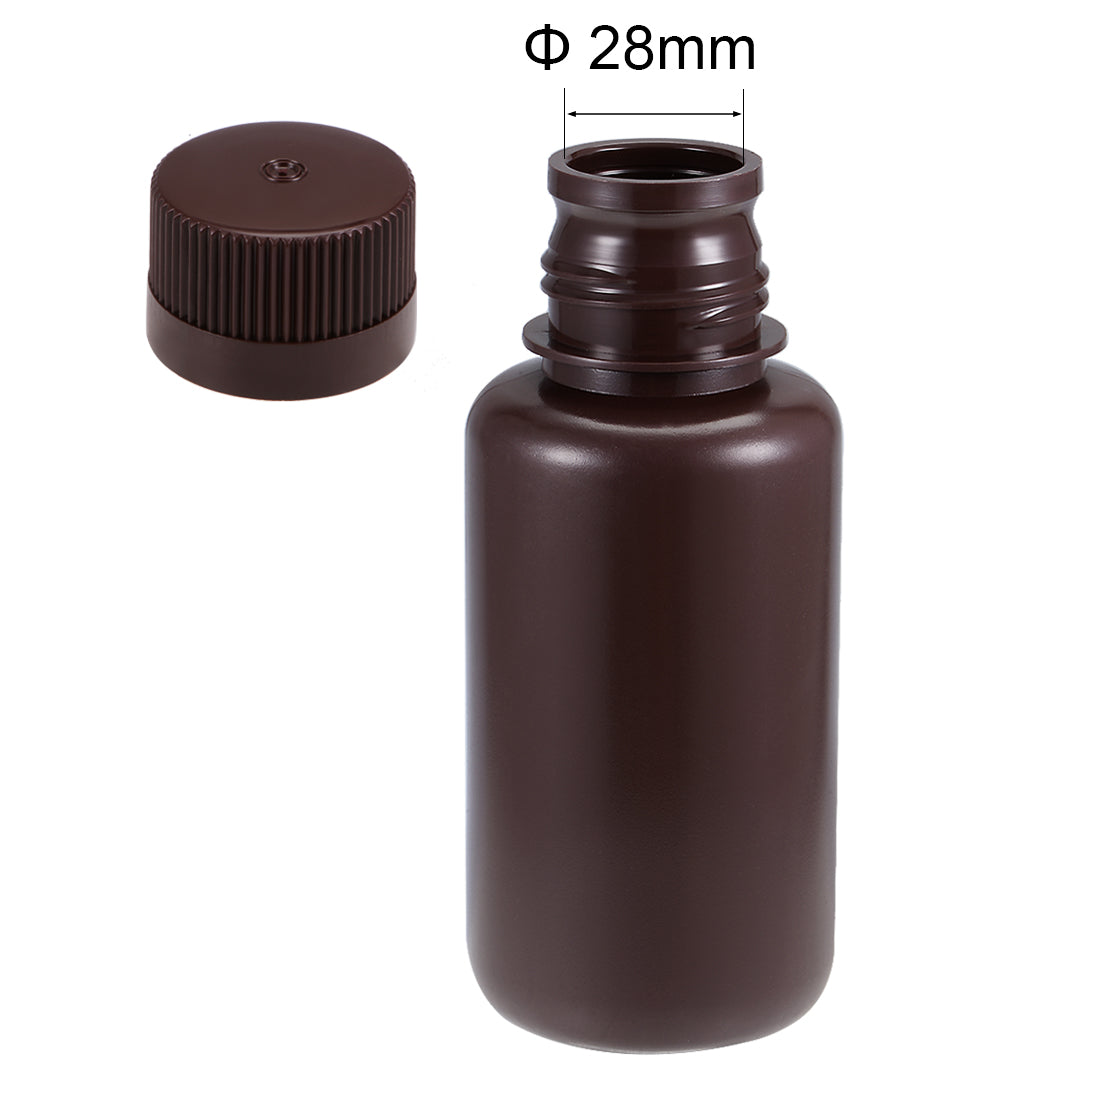 uxcell Uxcell Plastic Lab Chemical Reagent Bottle 250ml/8.5oz Small Mouth Sample Sealing Liquid Storage Container Brown 2pcs